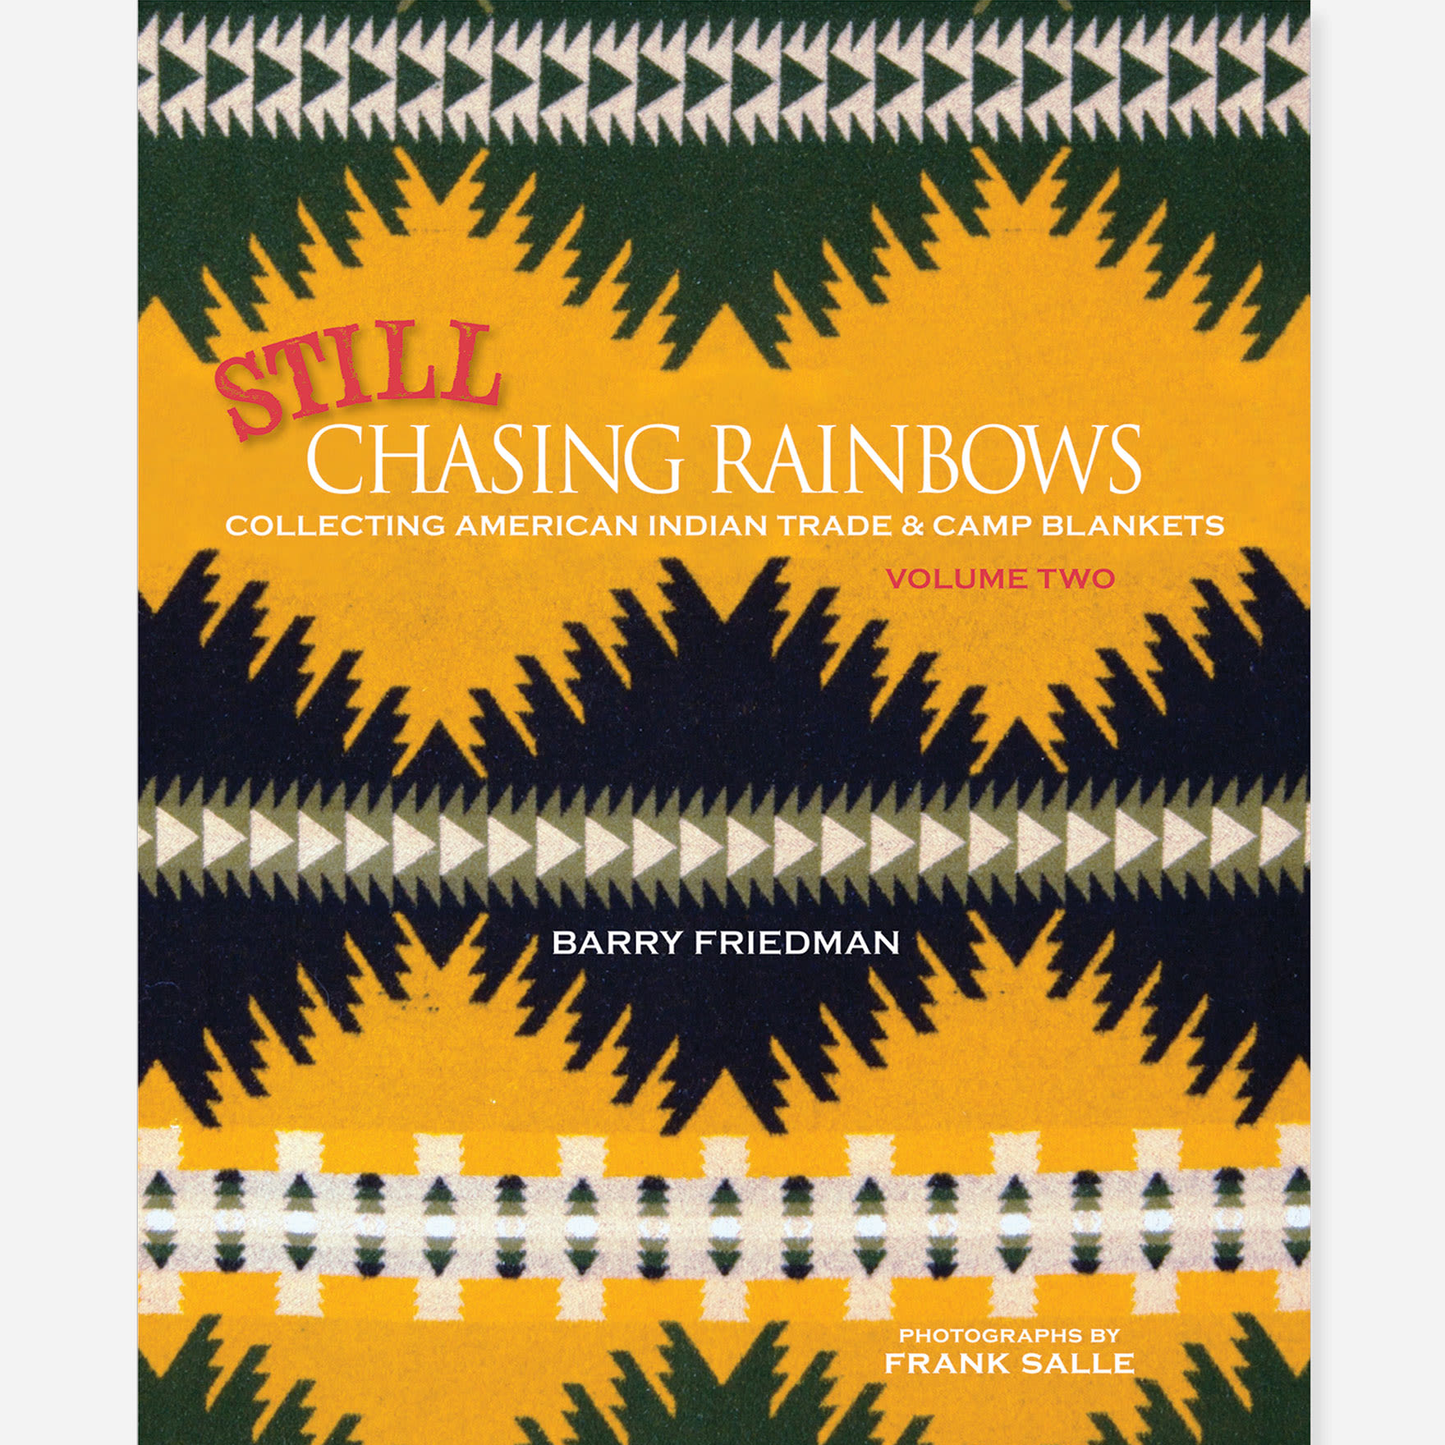 Still Chasing Rainbows: Collecting American Indian Trade & Camp Blankets, Volume Two by Barry Friedman